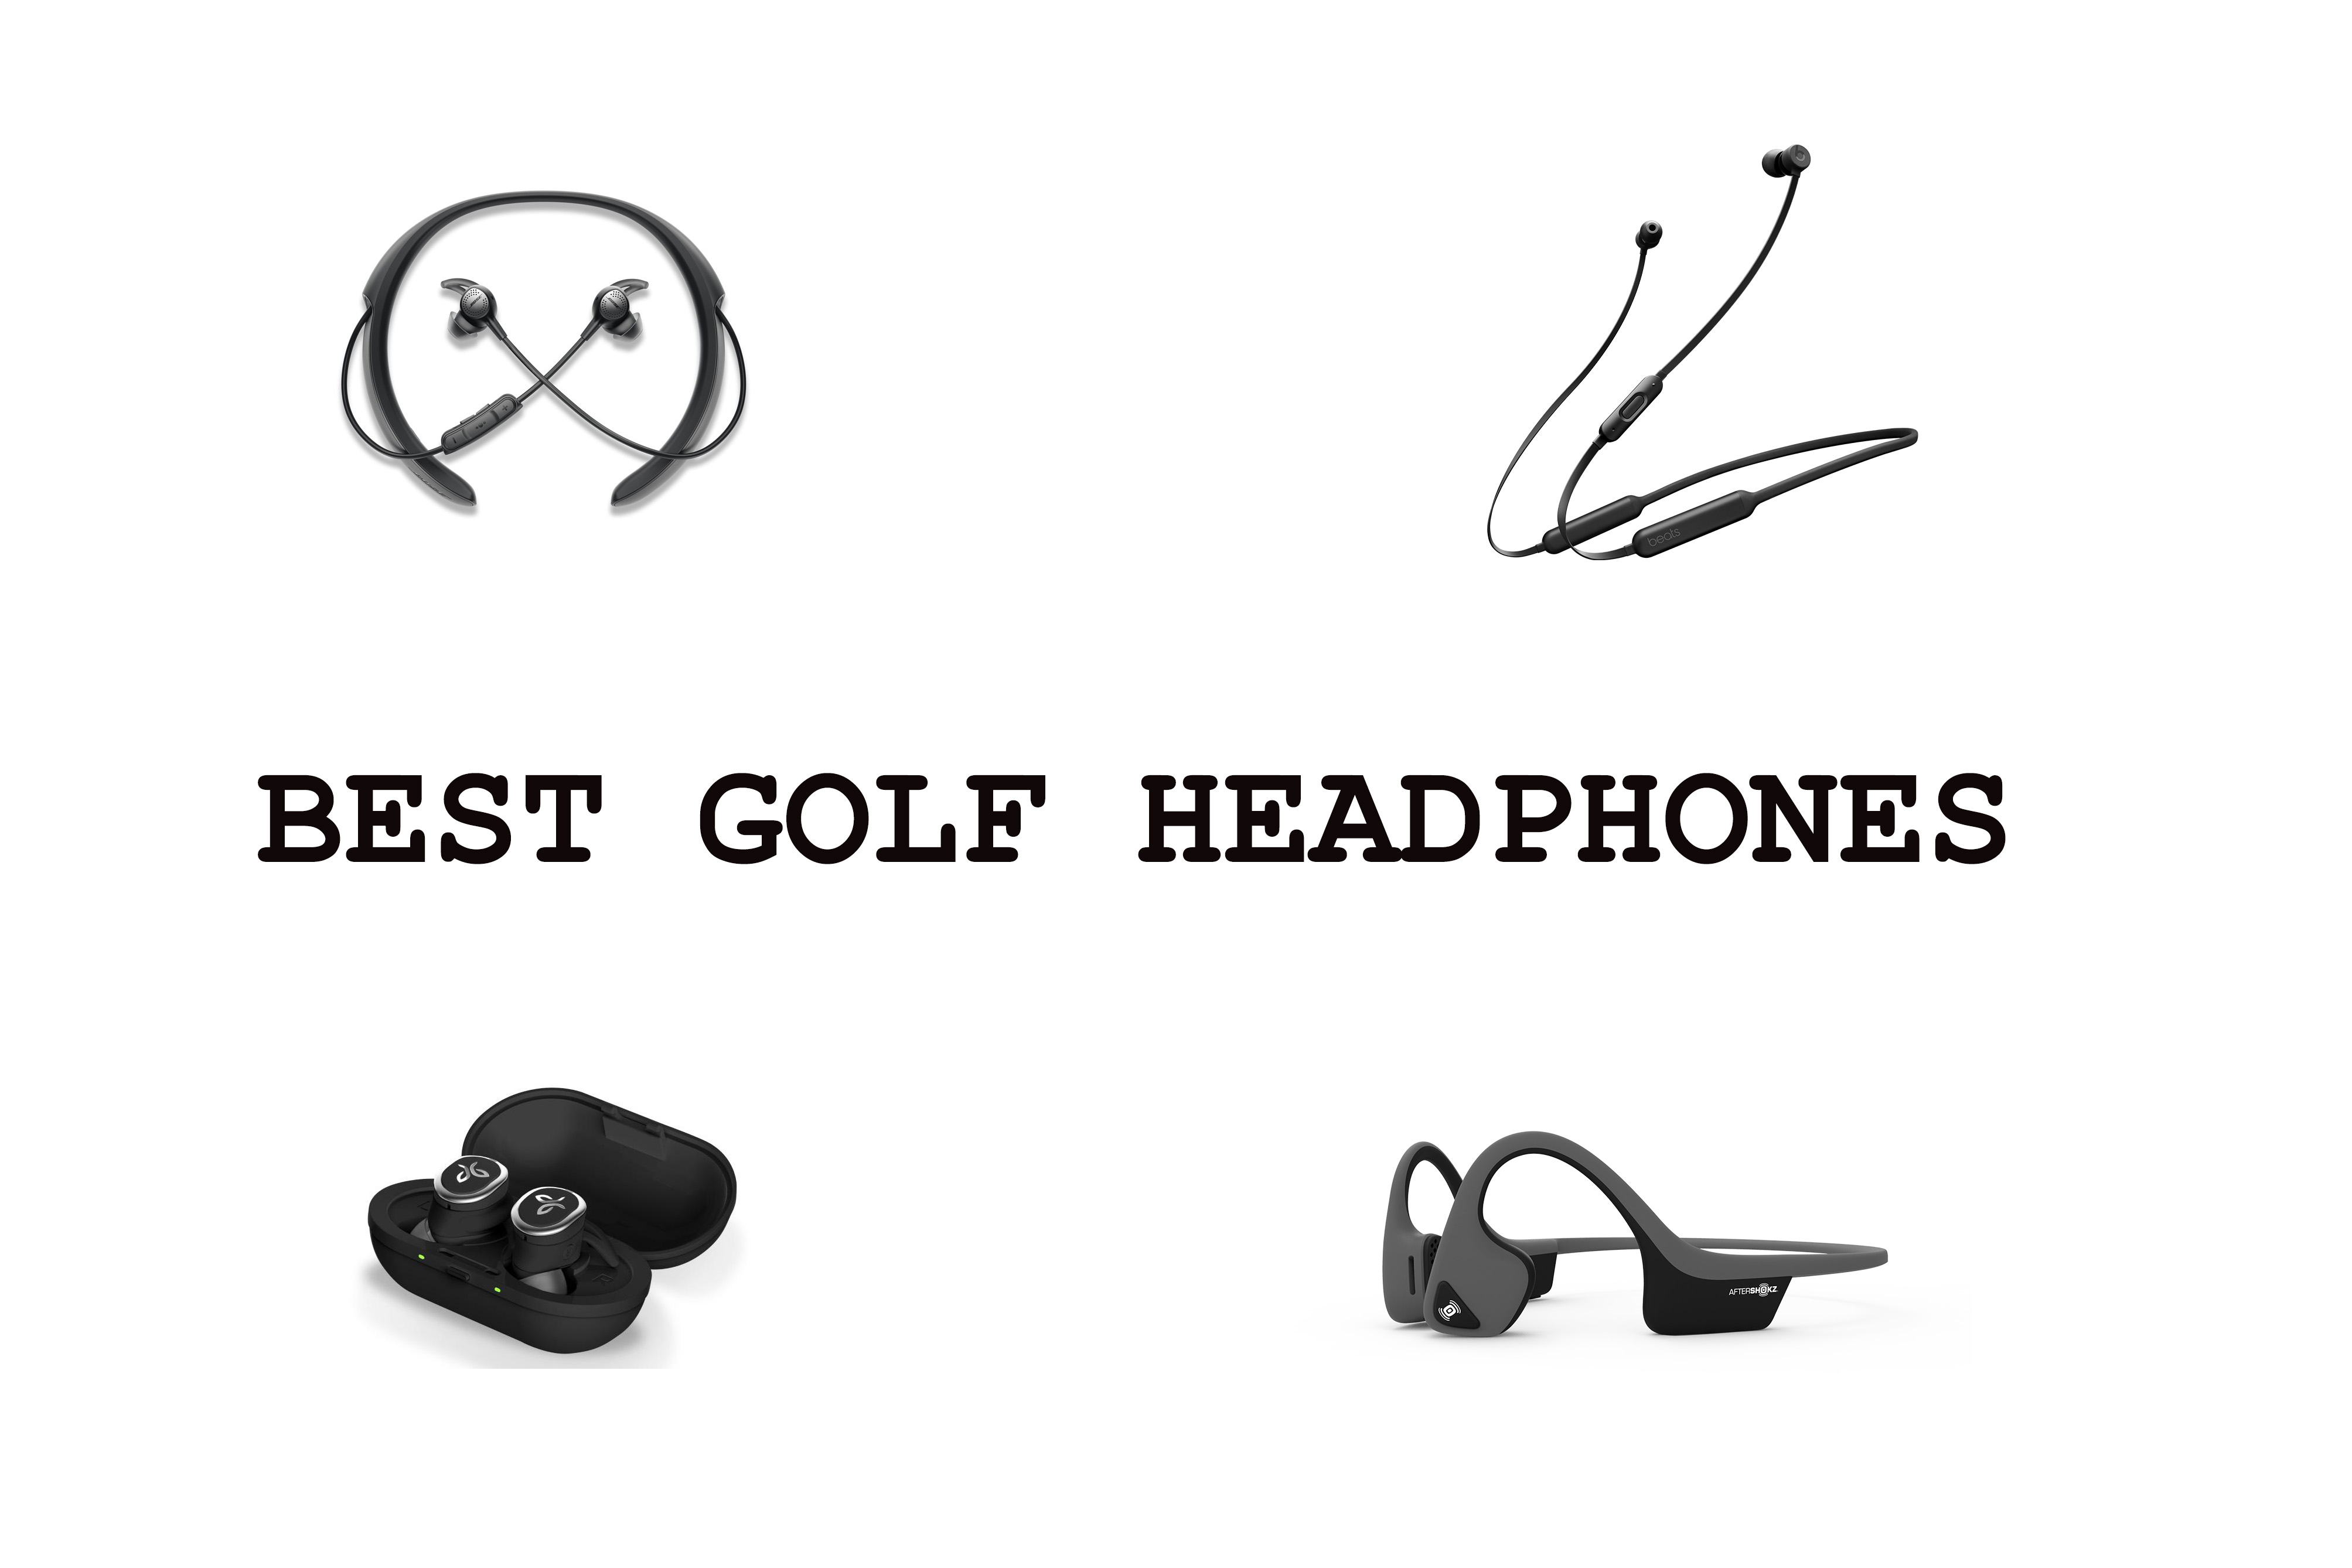 Best golf headphones 2018: practice on the range like Rory McIlroy and Tiger Woods